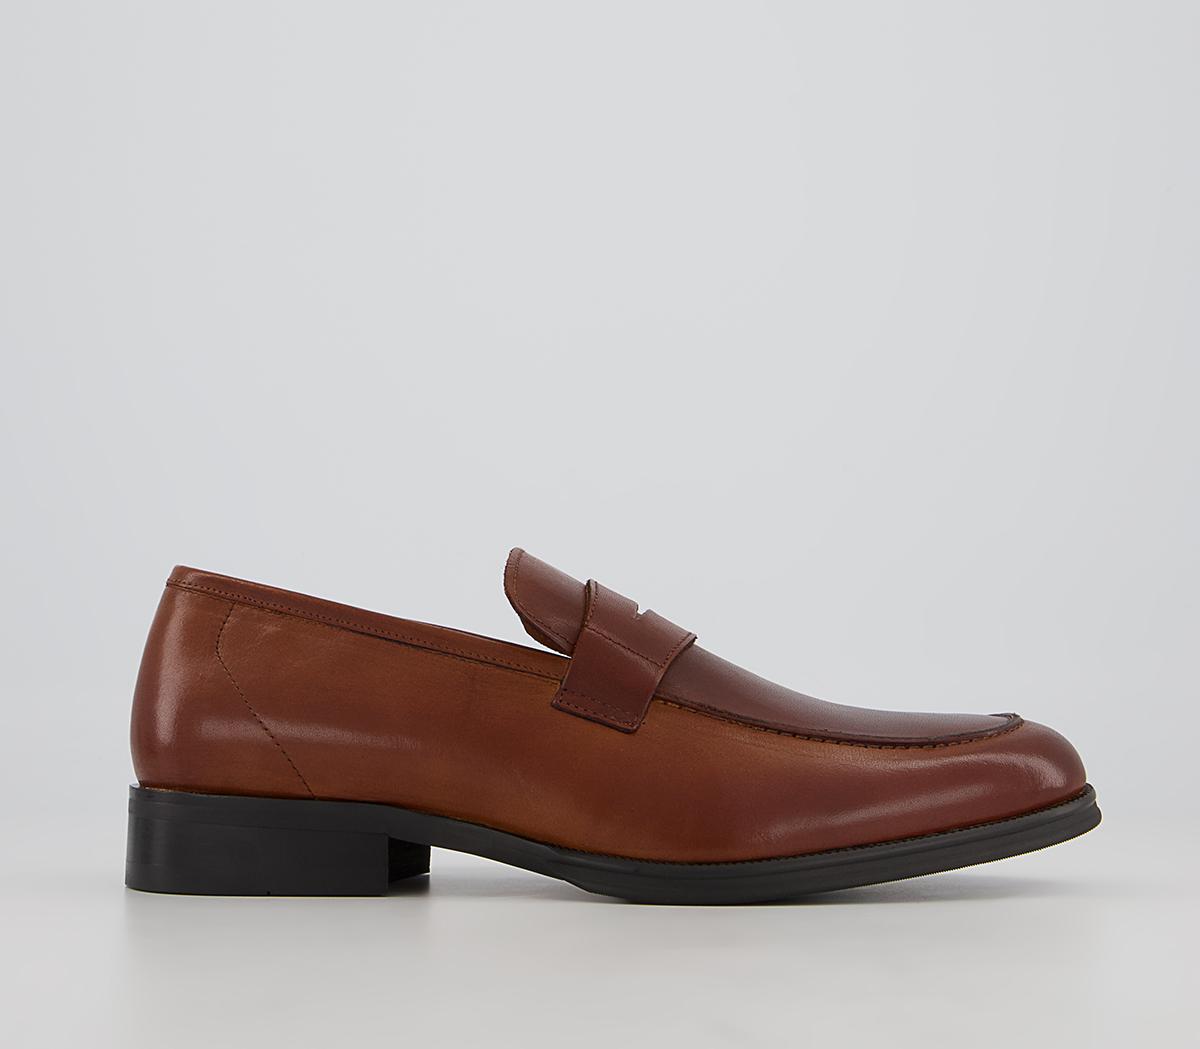 OfficeMilan Classic Saddle LoafersTan Leather